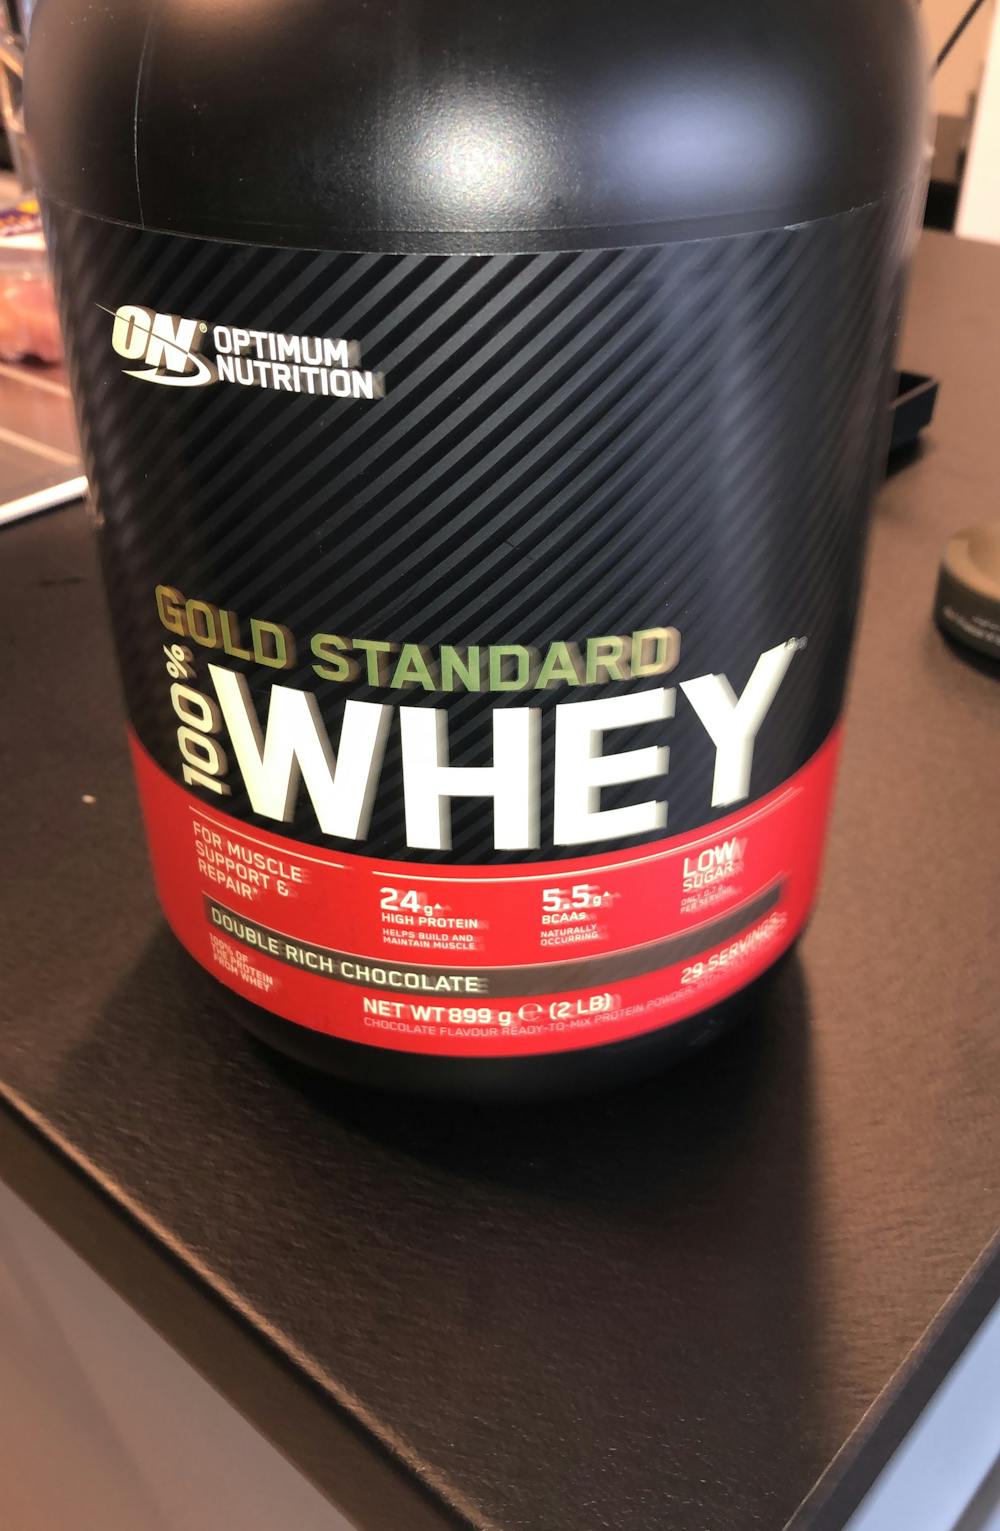 Gold standard 100% whey, double rich chocolate, Optimum Nutrition